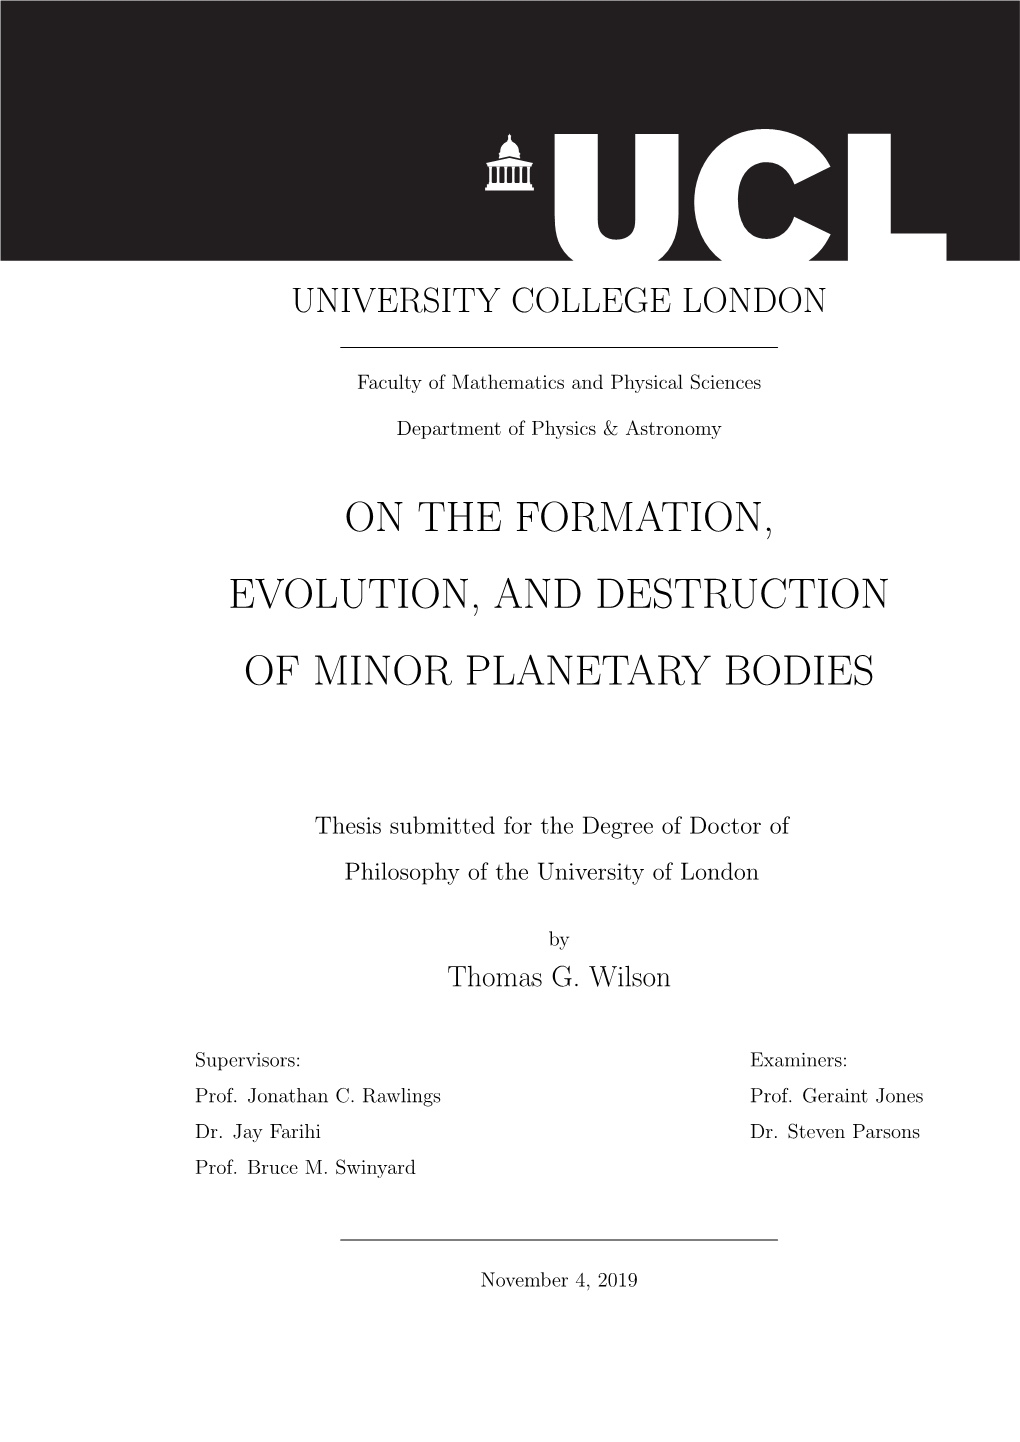 On the Formation, Evolution, and Destruction of Minor Planetary Bodies